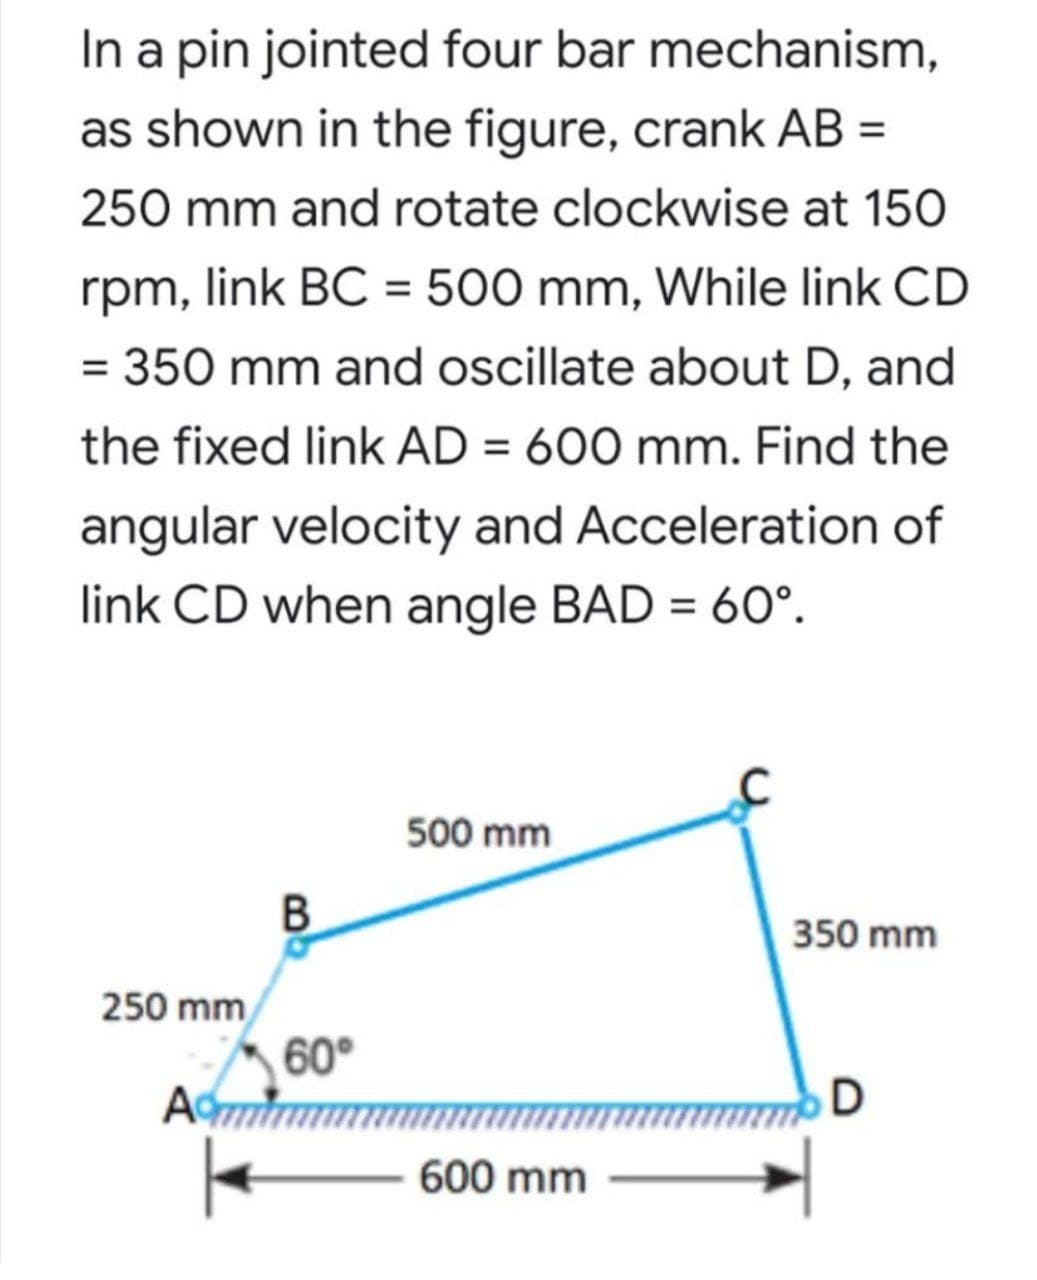 In a pin jointed four bar mechanism,
as shown in the figure, crank AB =
250 mm and rotate clockwise at 150
rpm, link BC = 500 mm, While link CD
= 350 mm and oscillate about D, and
the fixed link AD = 600 mm. Find the
angular velocity and Acceleration of
link CD when angle BAD = 60°.
500 mm
350 mm
250 mm
60°
D
600 mm
